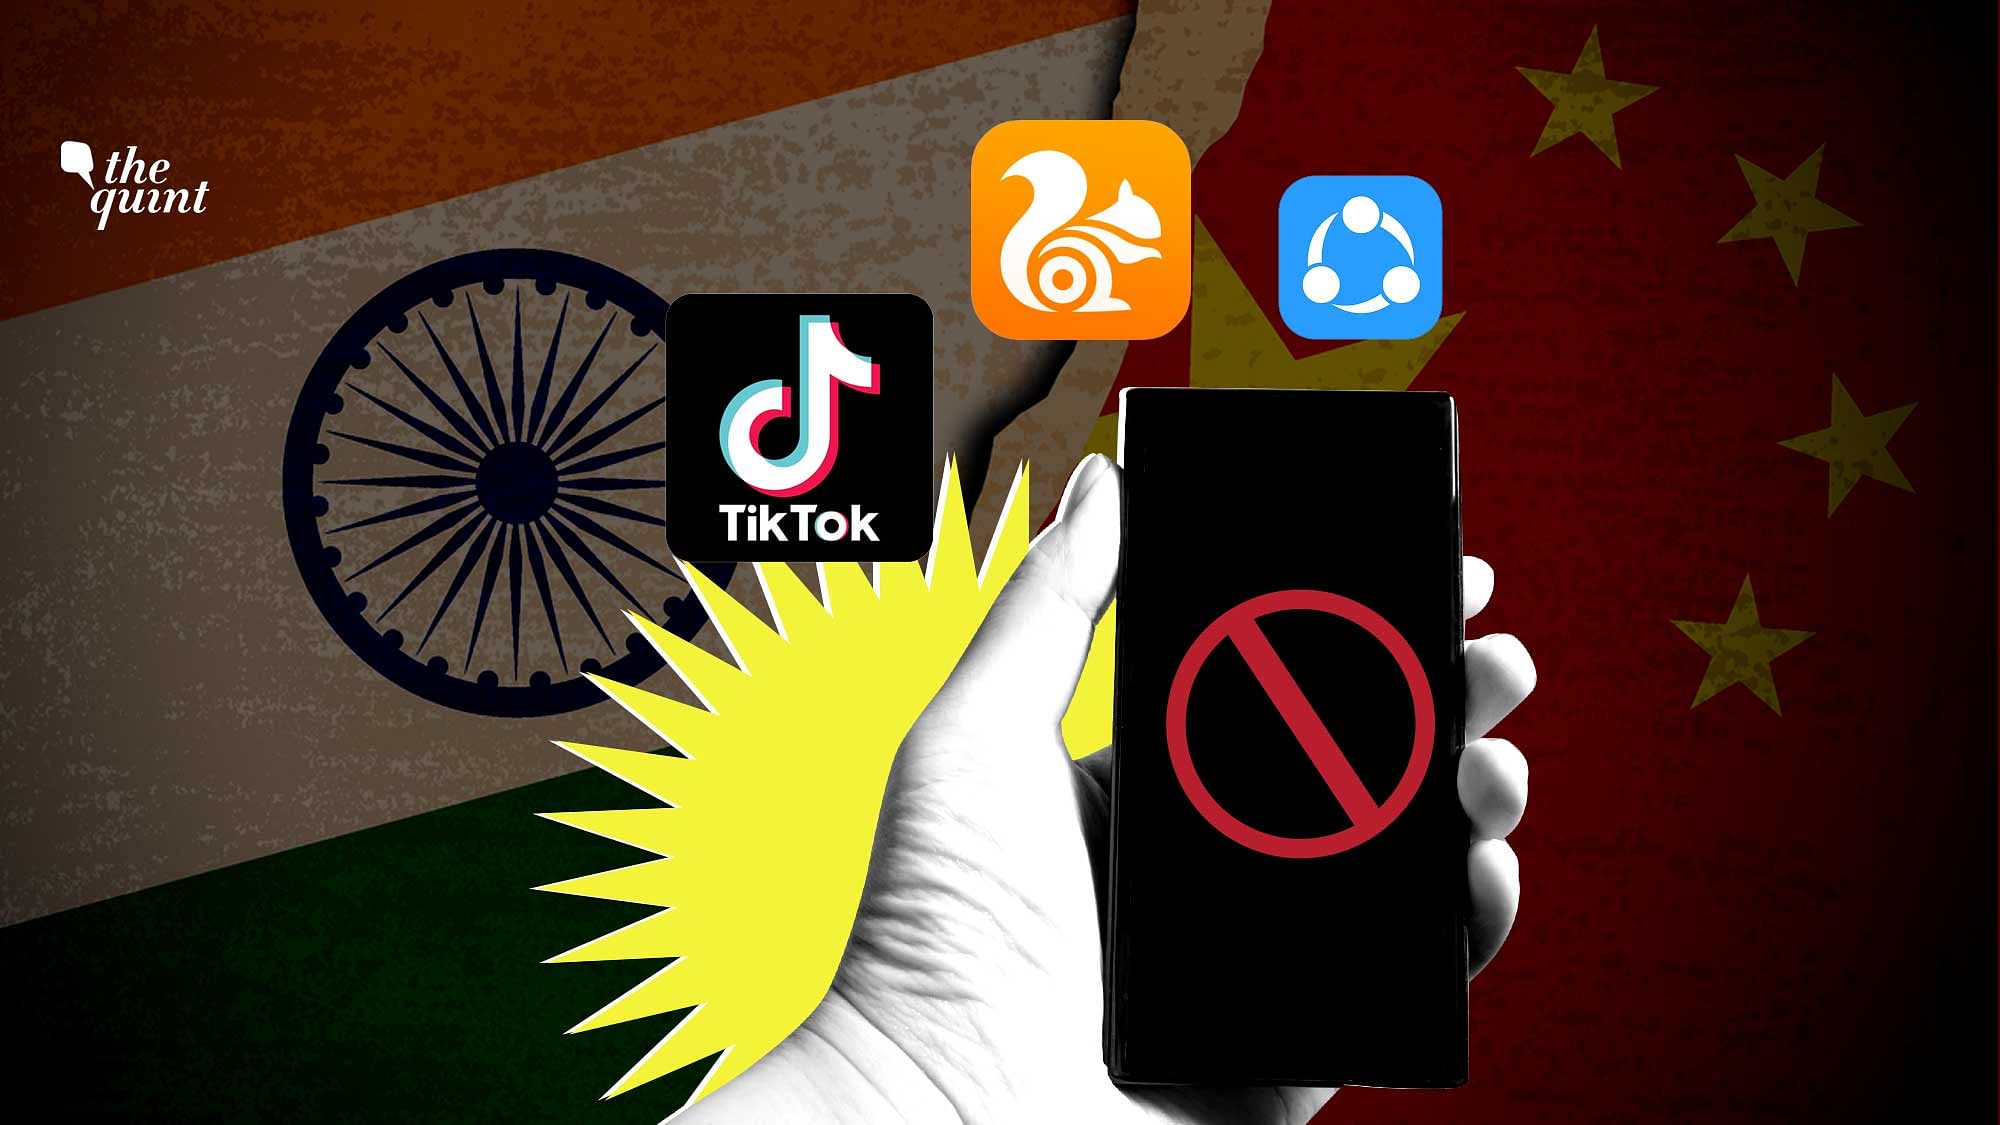 The government had on 29 June, announced a ban on 59 apps, all of them Chinese-owned, including the hugely popular TikTok.&nbsp;